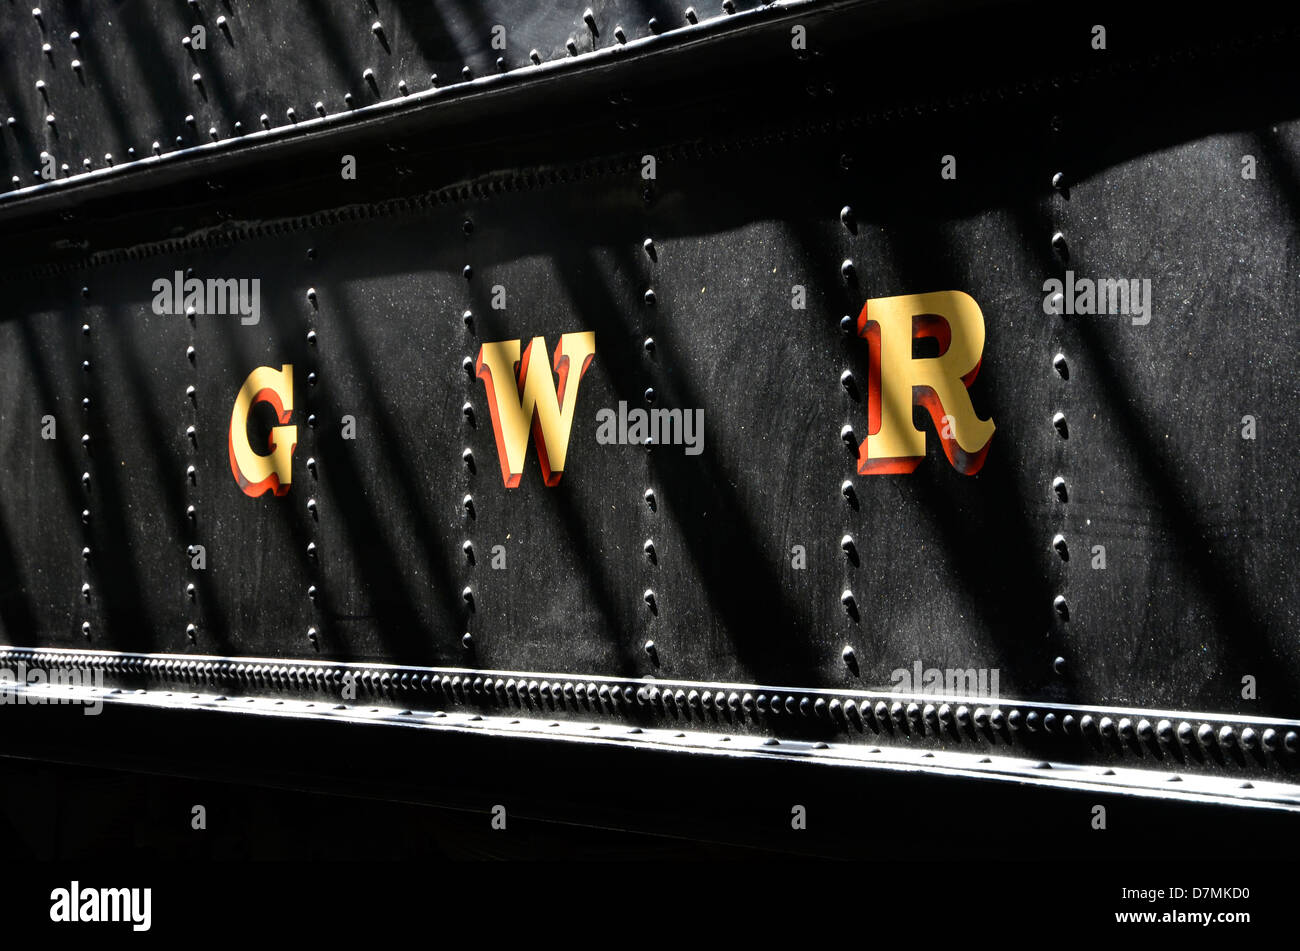 GWR - Great Western Railway lettering on wartime black painted tender of  steam loco in the running shed, Didcot Railway Centre Stock Photo - Alamy